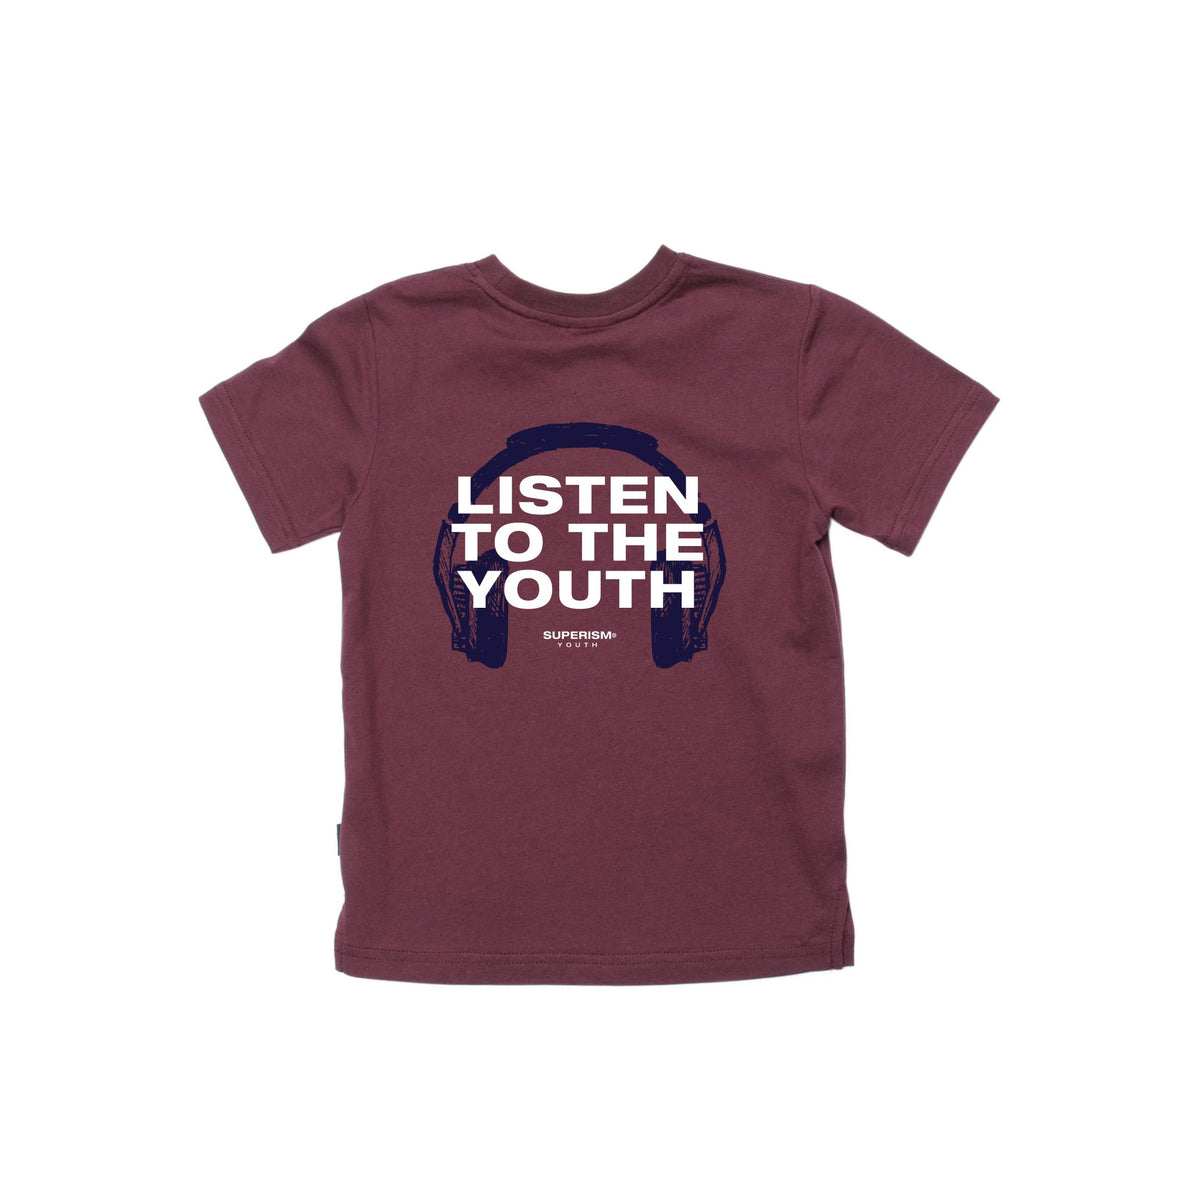 Superism - Listen To The Youth